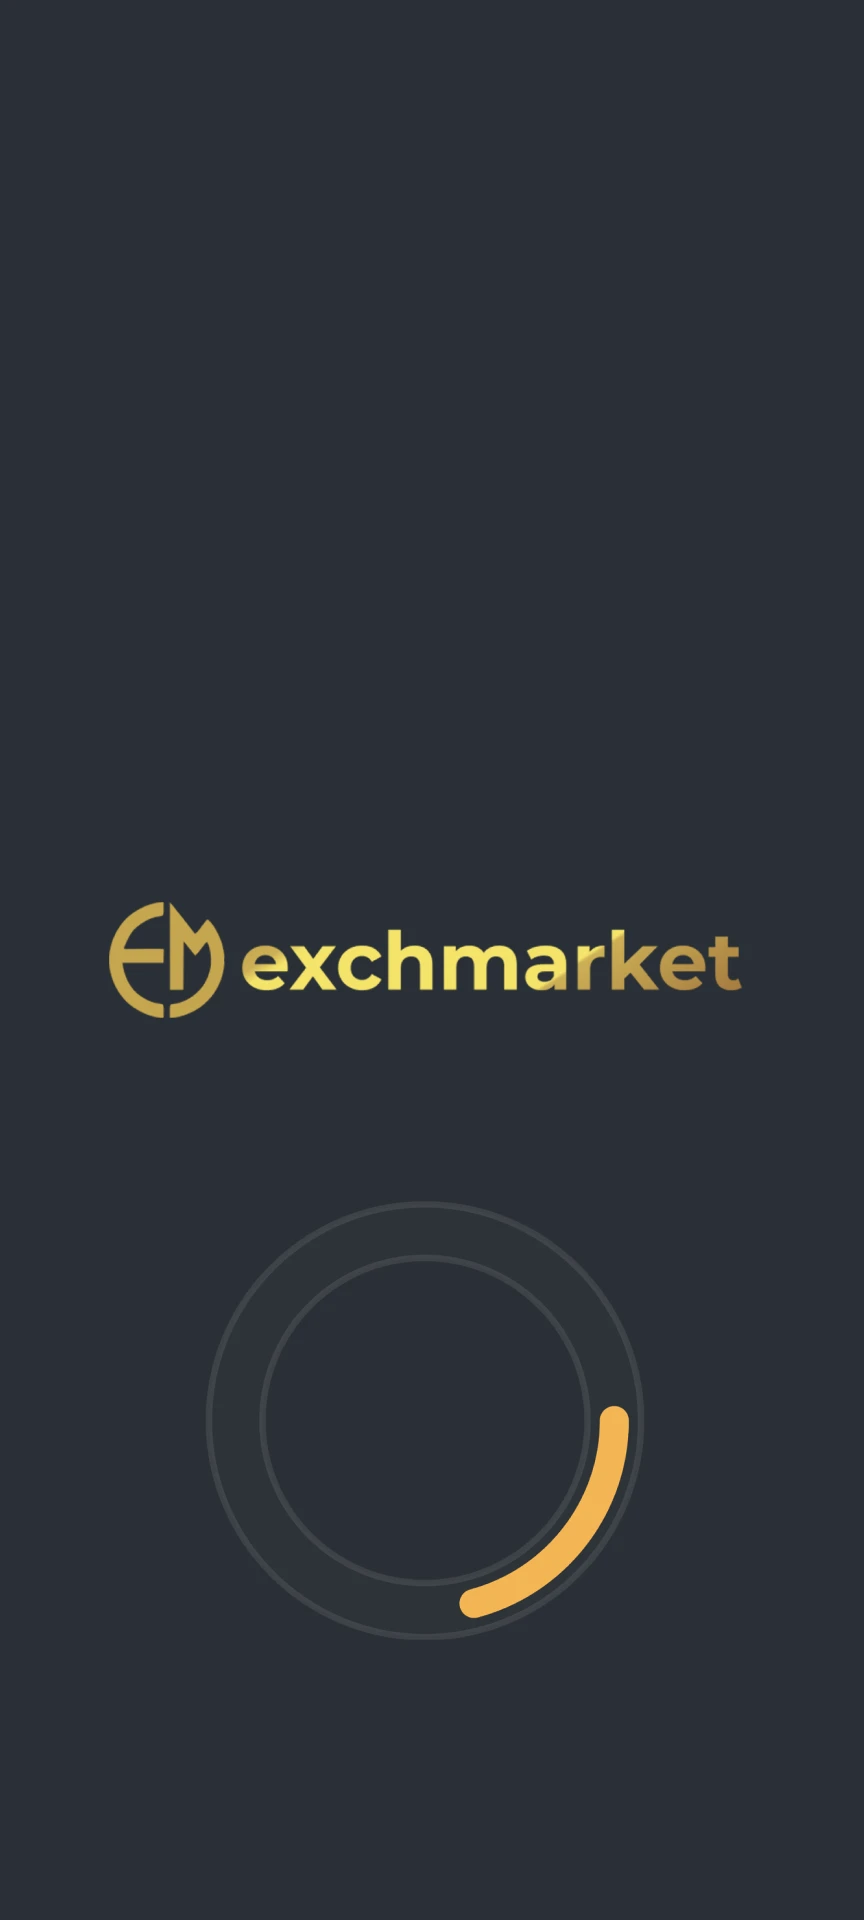 Install Exchmarket apps for Android.